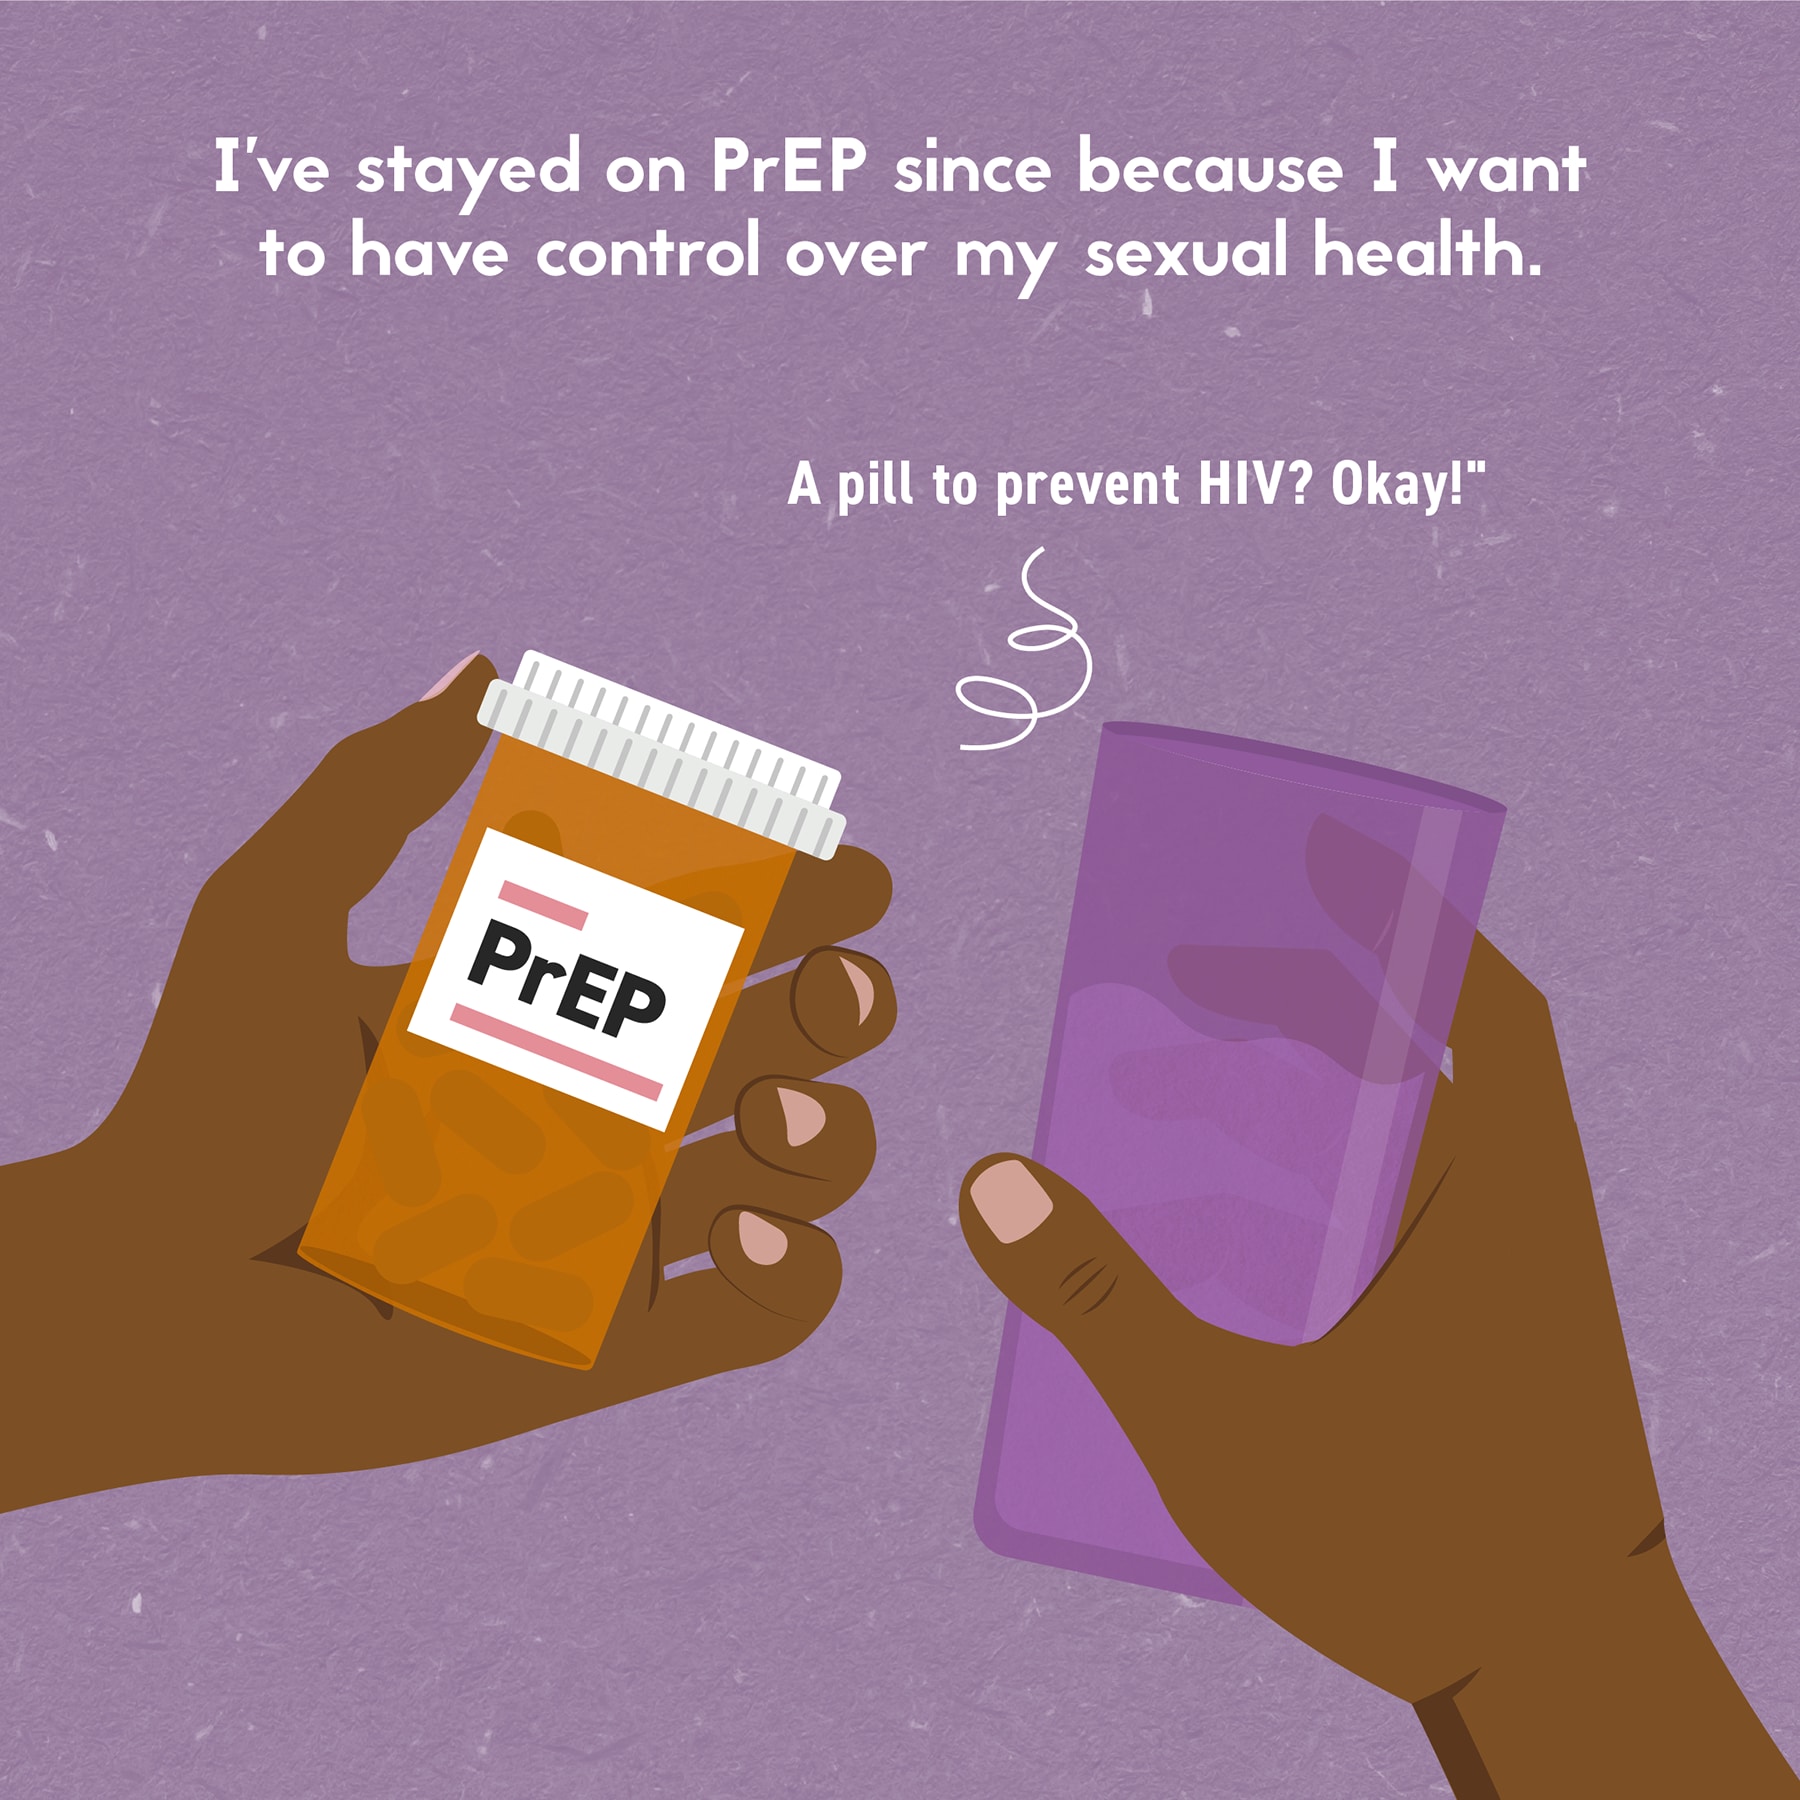 I've stayed on PrEP since because I want to have control over my sexual health.